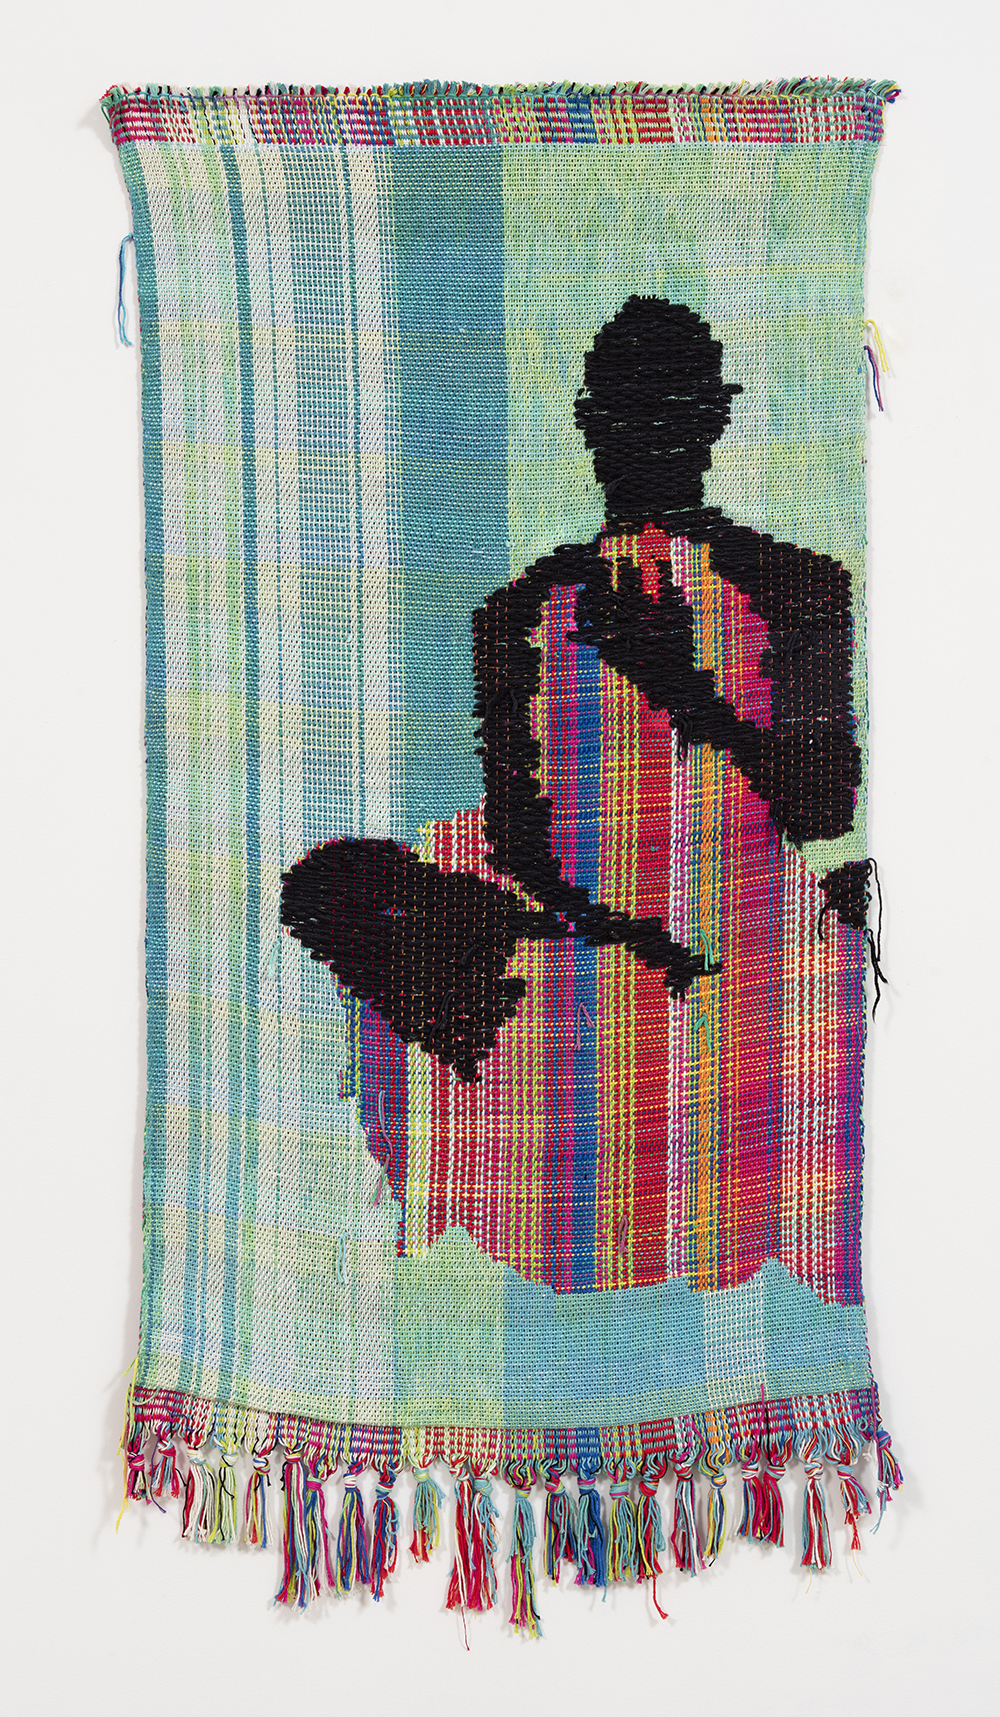 <em>The flame goes</em>, 2017. Cotton and acrylic yarn, 62 x 32 inches  (157.5 x 81.3 cm)